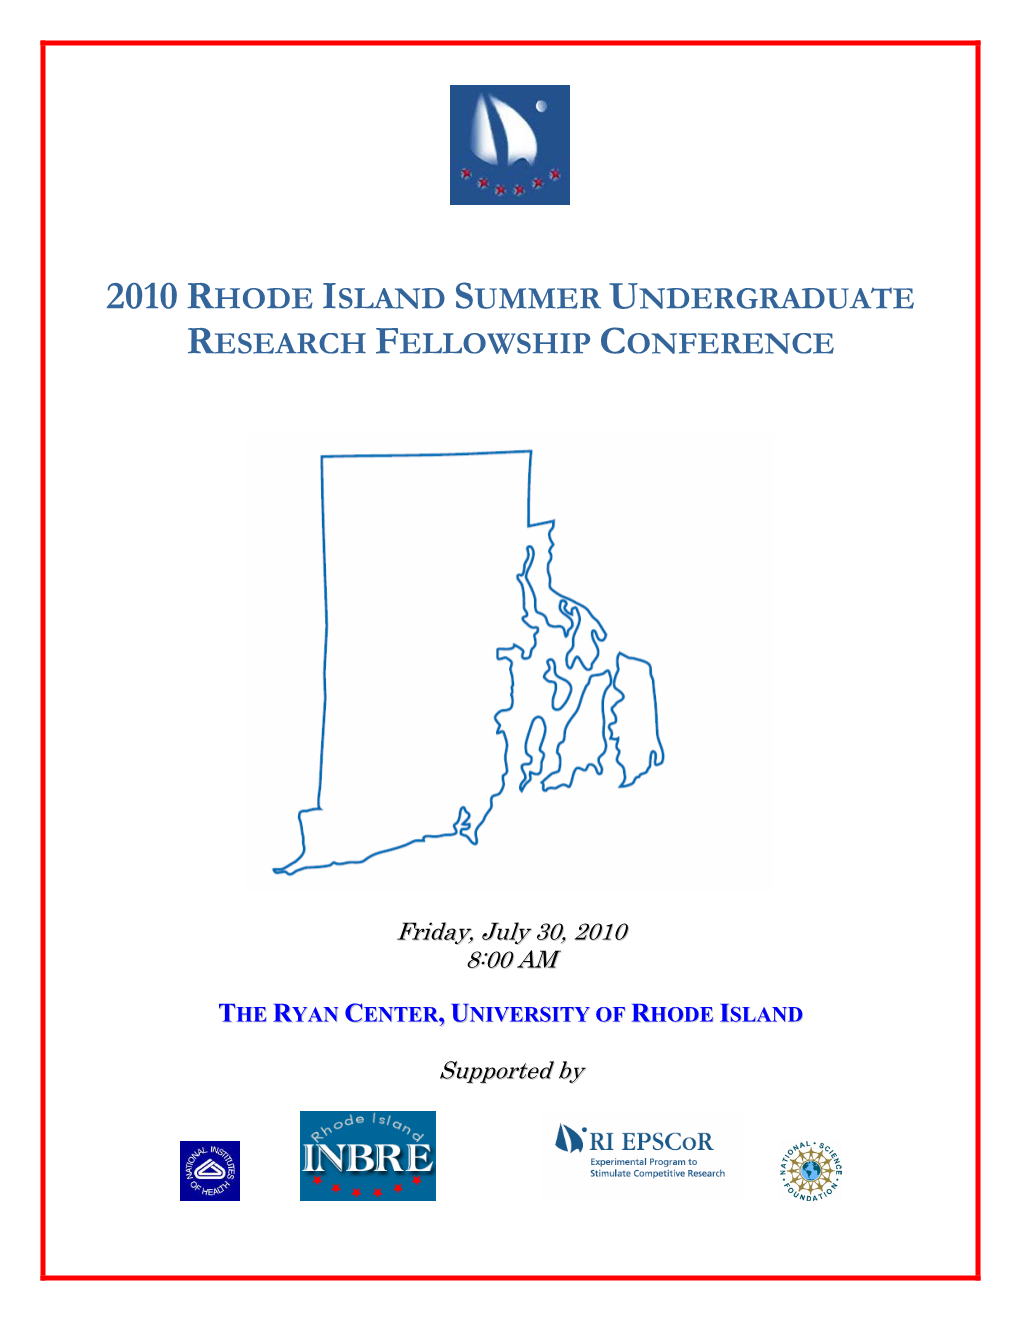 3Rd Annual RI SURF Conference Abstract Book, Friday, July 30, 2010